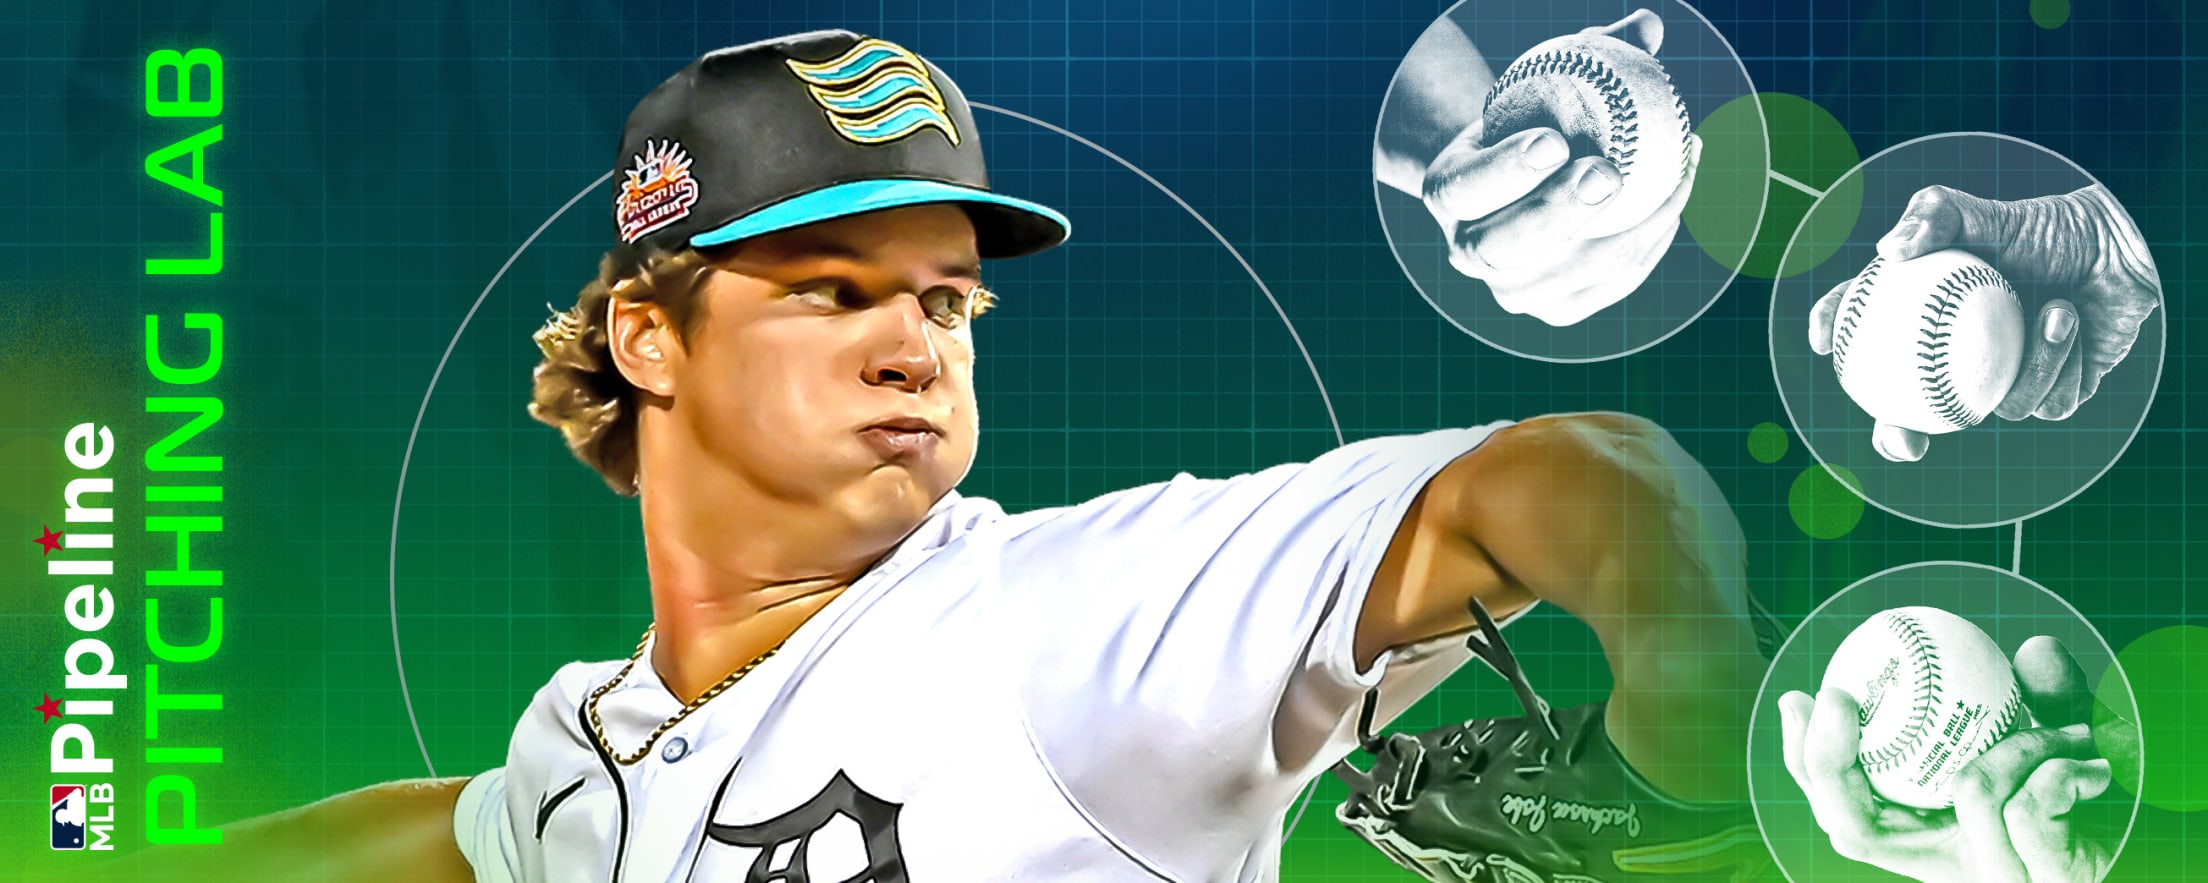 30 stars compete in MLB The Show Players League